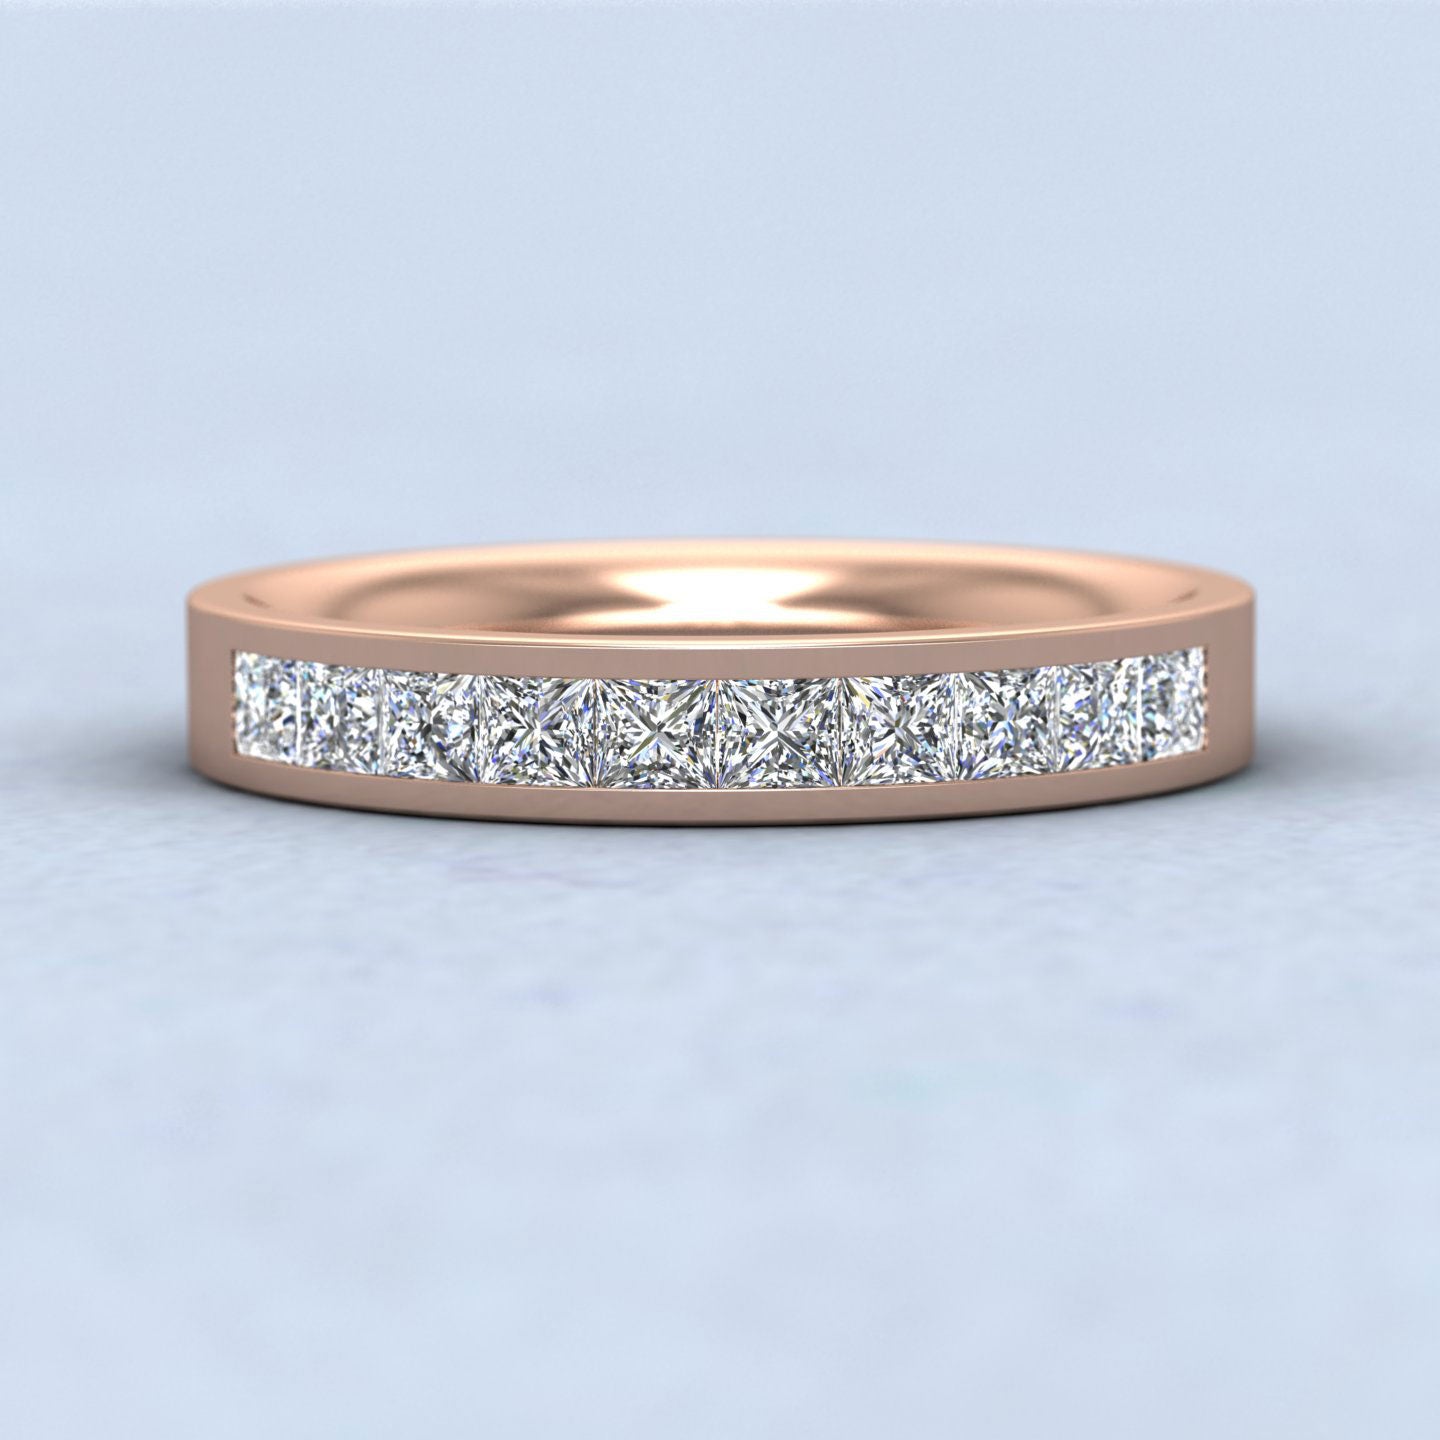 Princess Cut 10 Diamond 0.75ct Channel Set Ring In 9ct Rose Gold. 3.5mm Wide